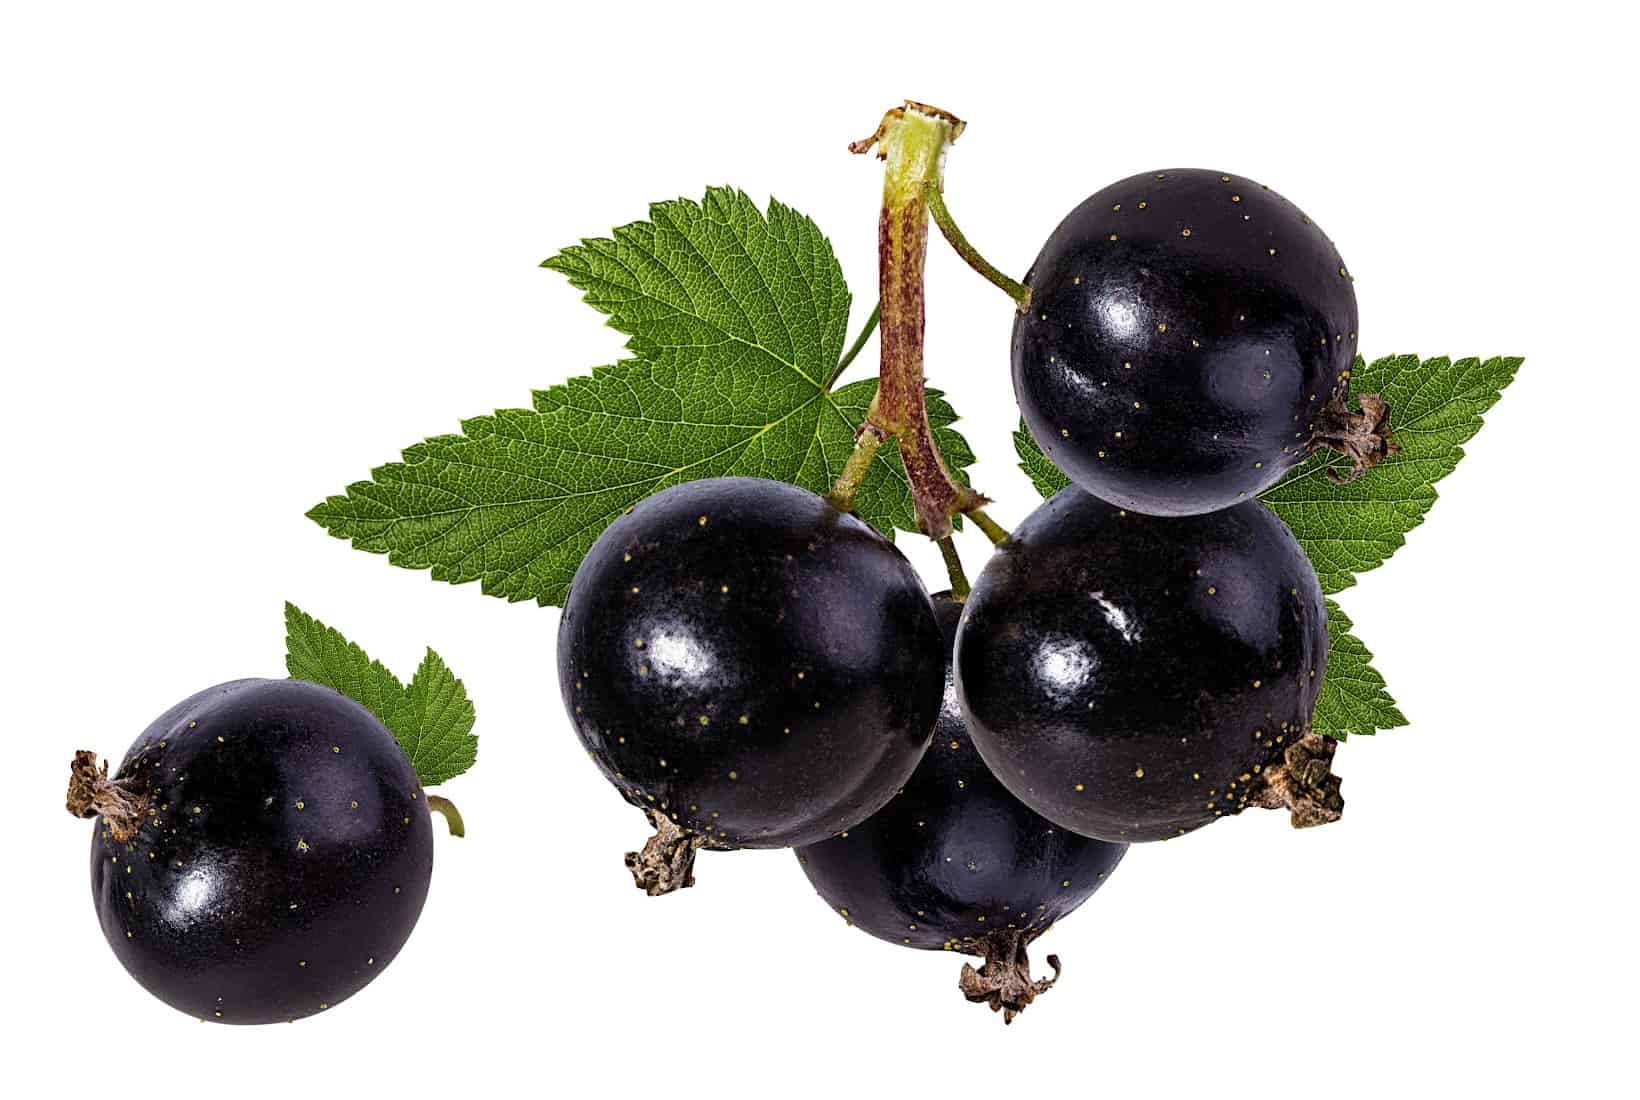 A bunch of black currants on a branch with leaves.